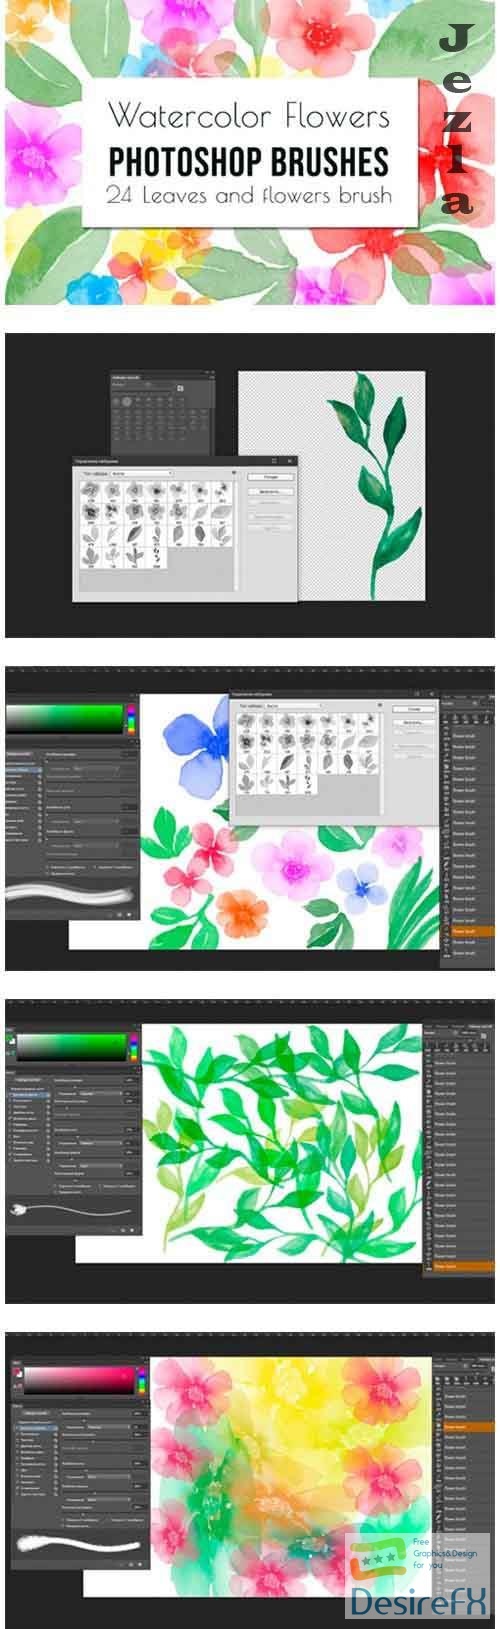 Flowers and leaves Photoshop Brushes - 1202019